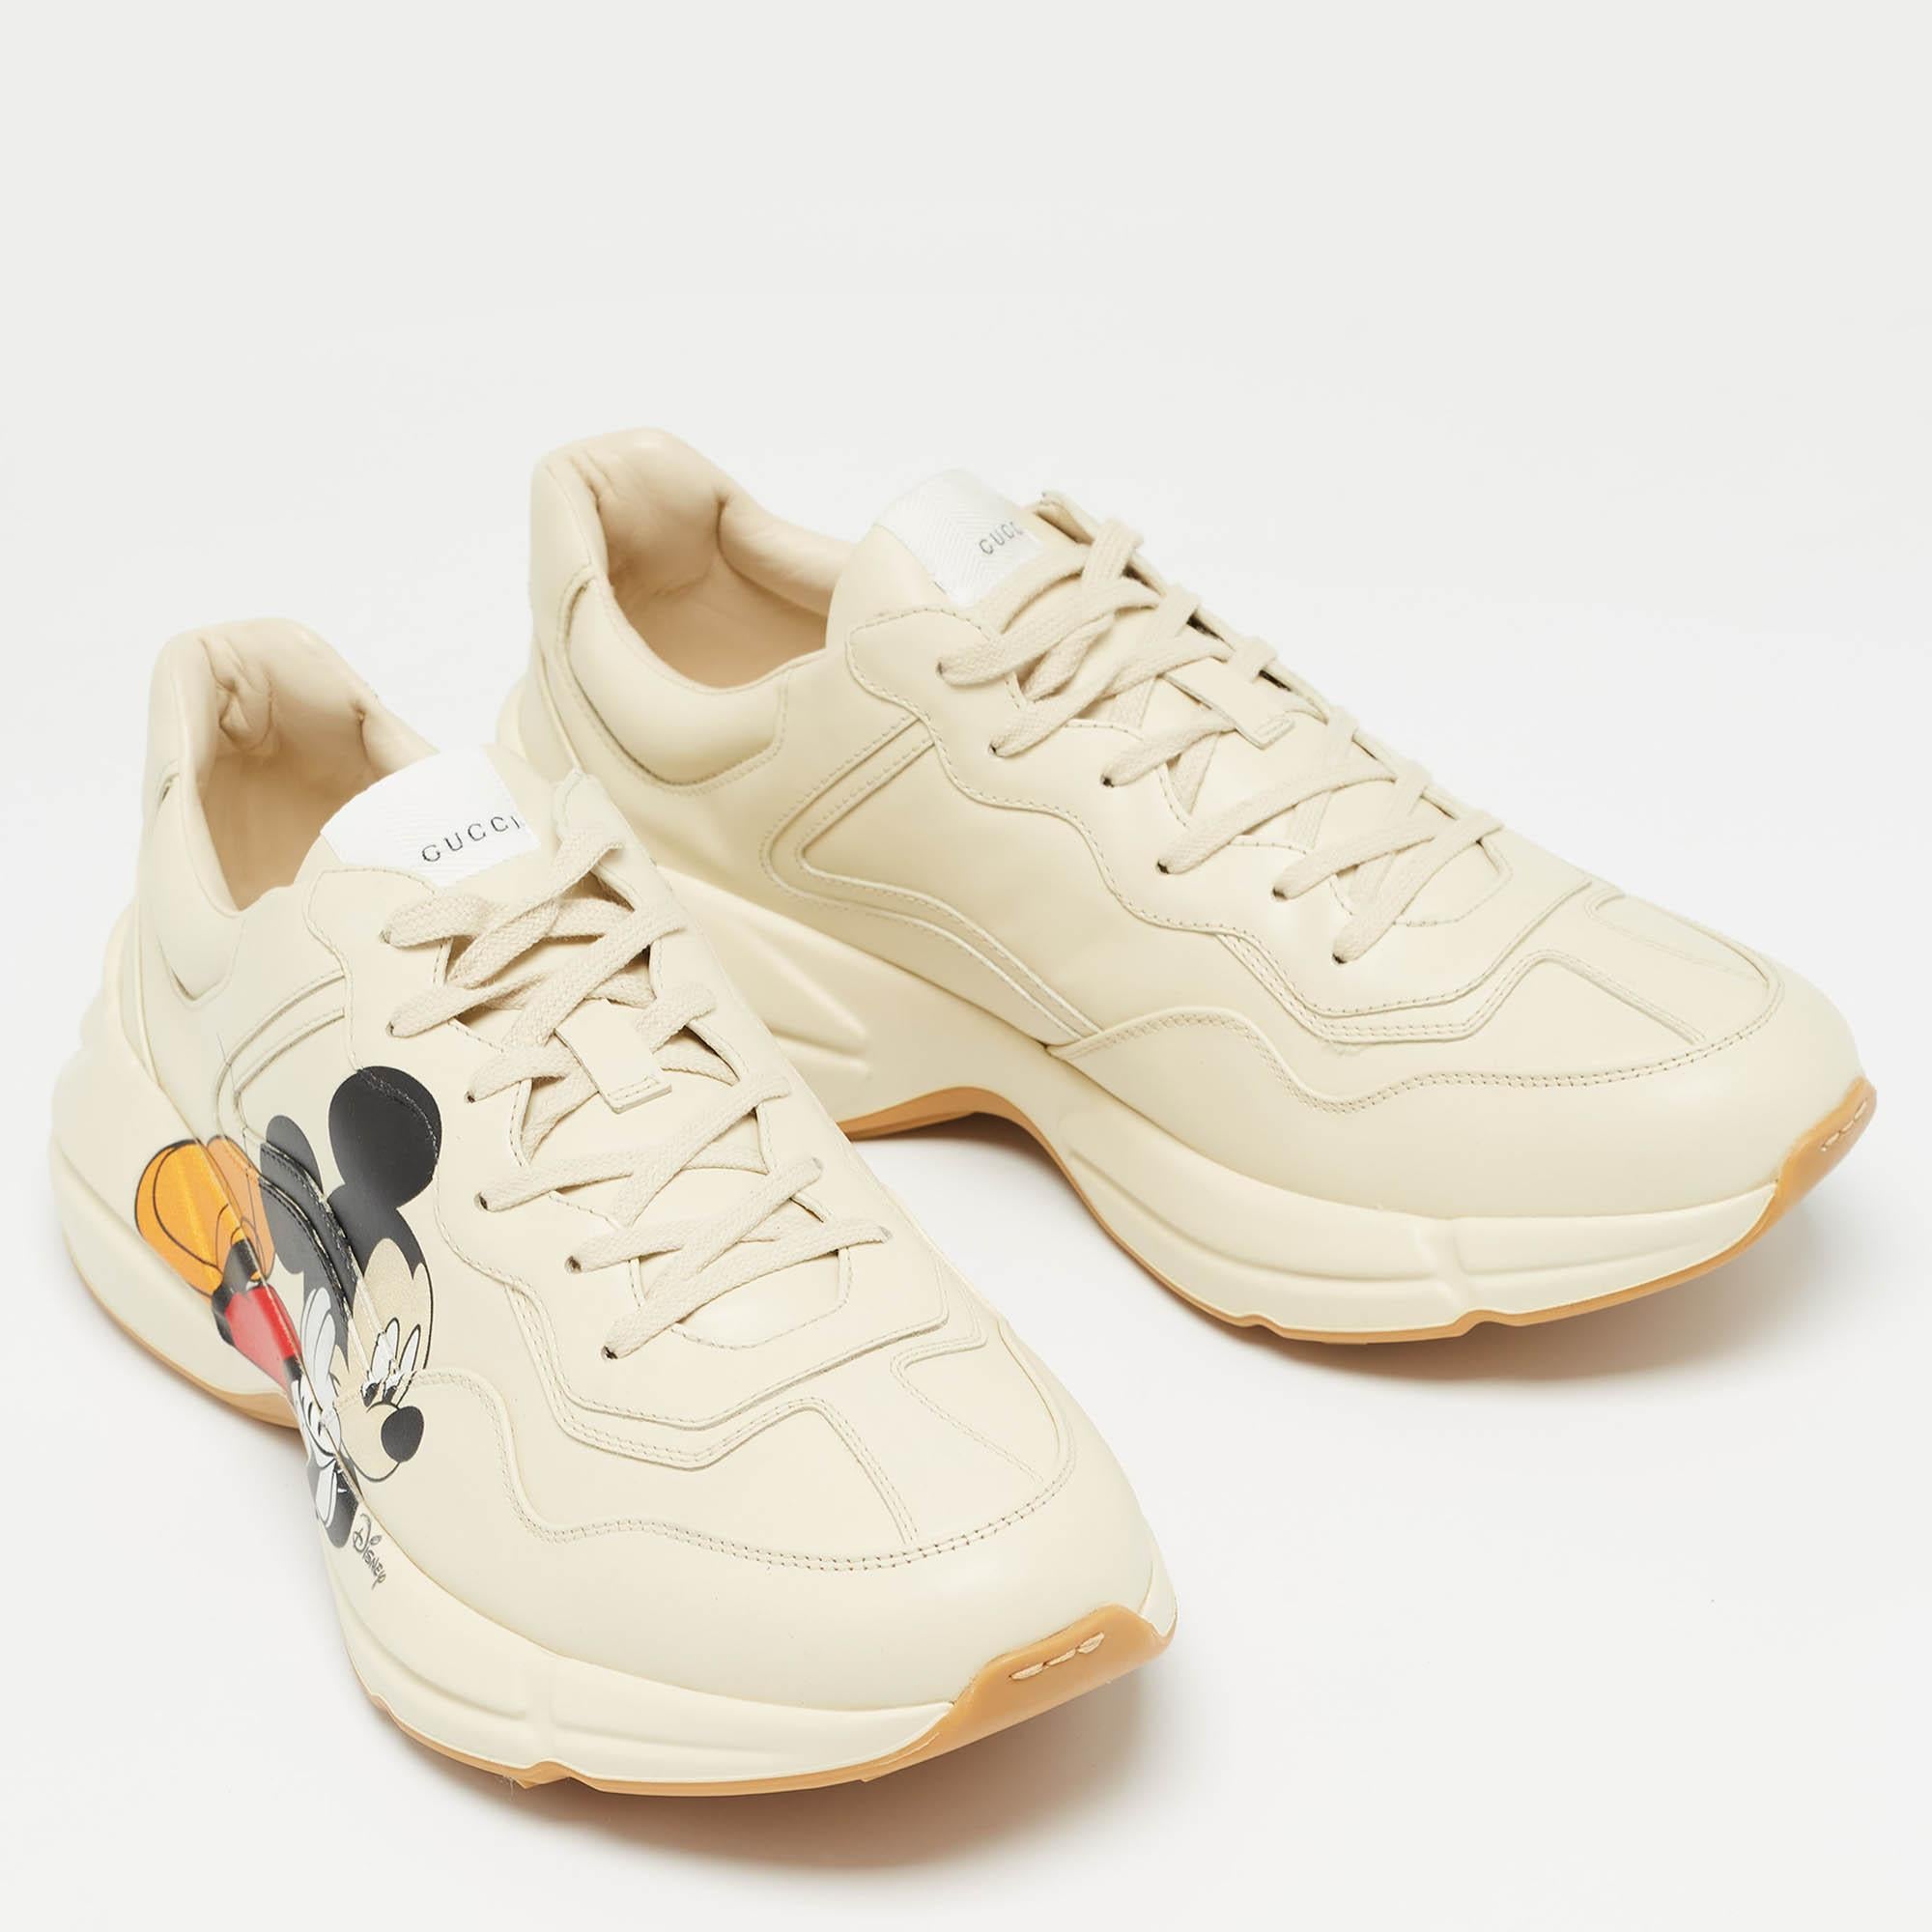 Women's Gucci x Disney Cream Leather Mickey Mouse Rhyton Sneakers Size 47 For Sale